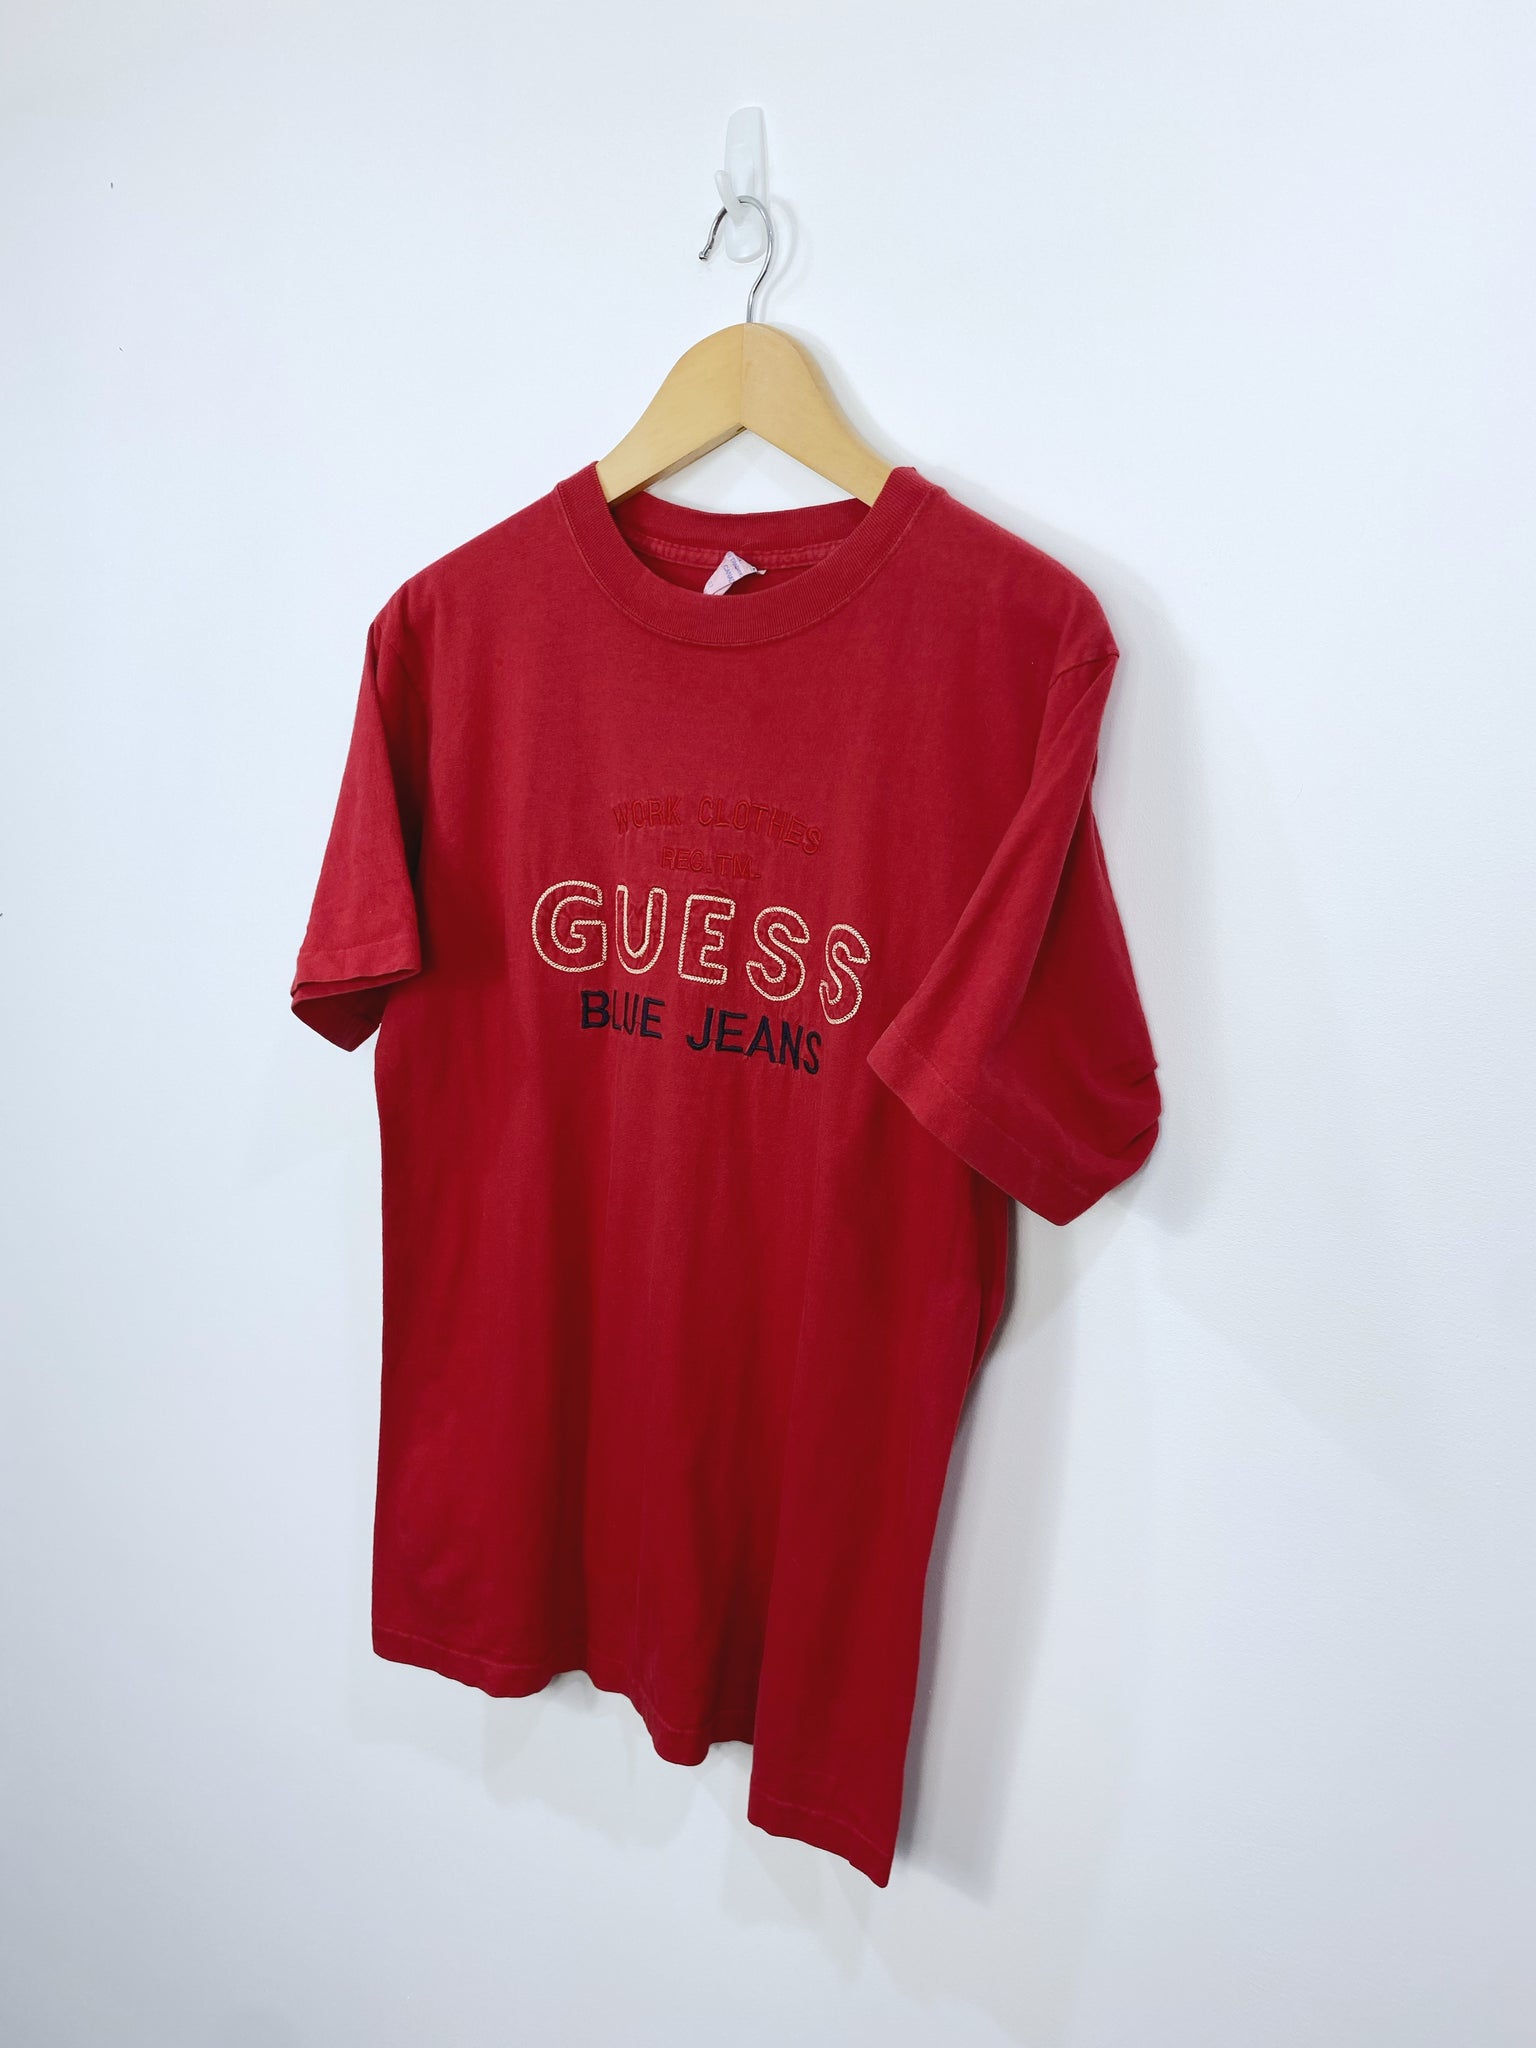 Vintage 90s Guess Jeans Embroidered T-shirt M